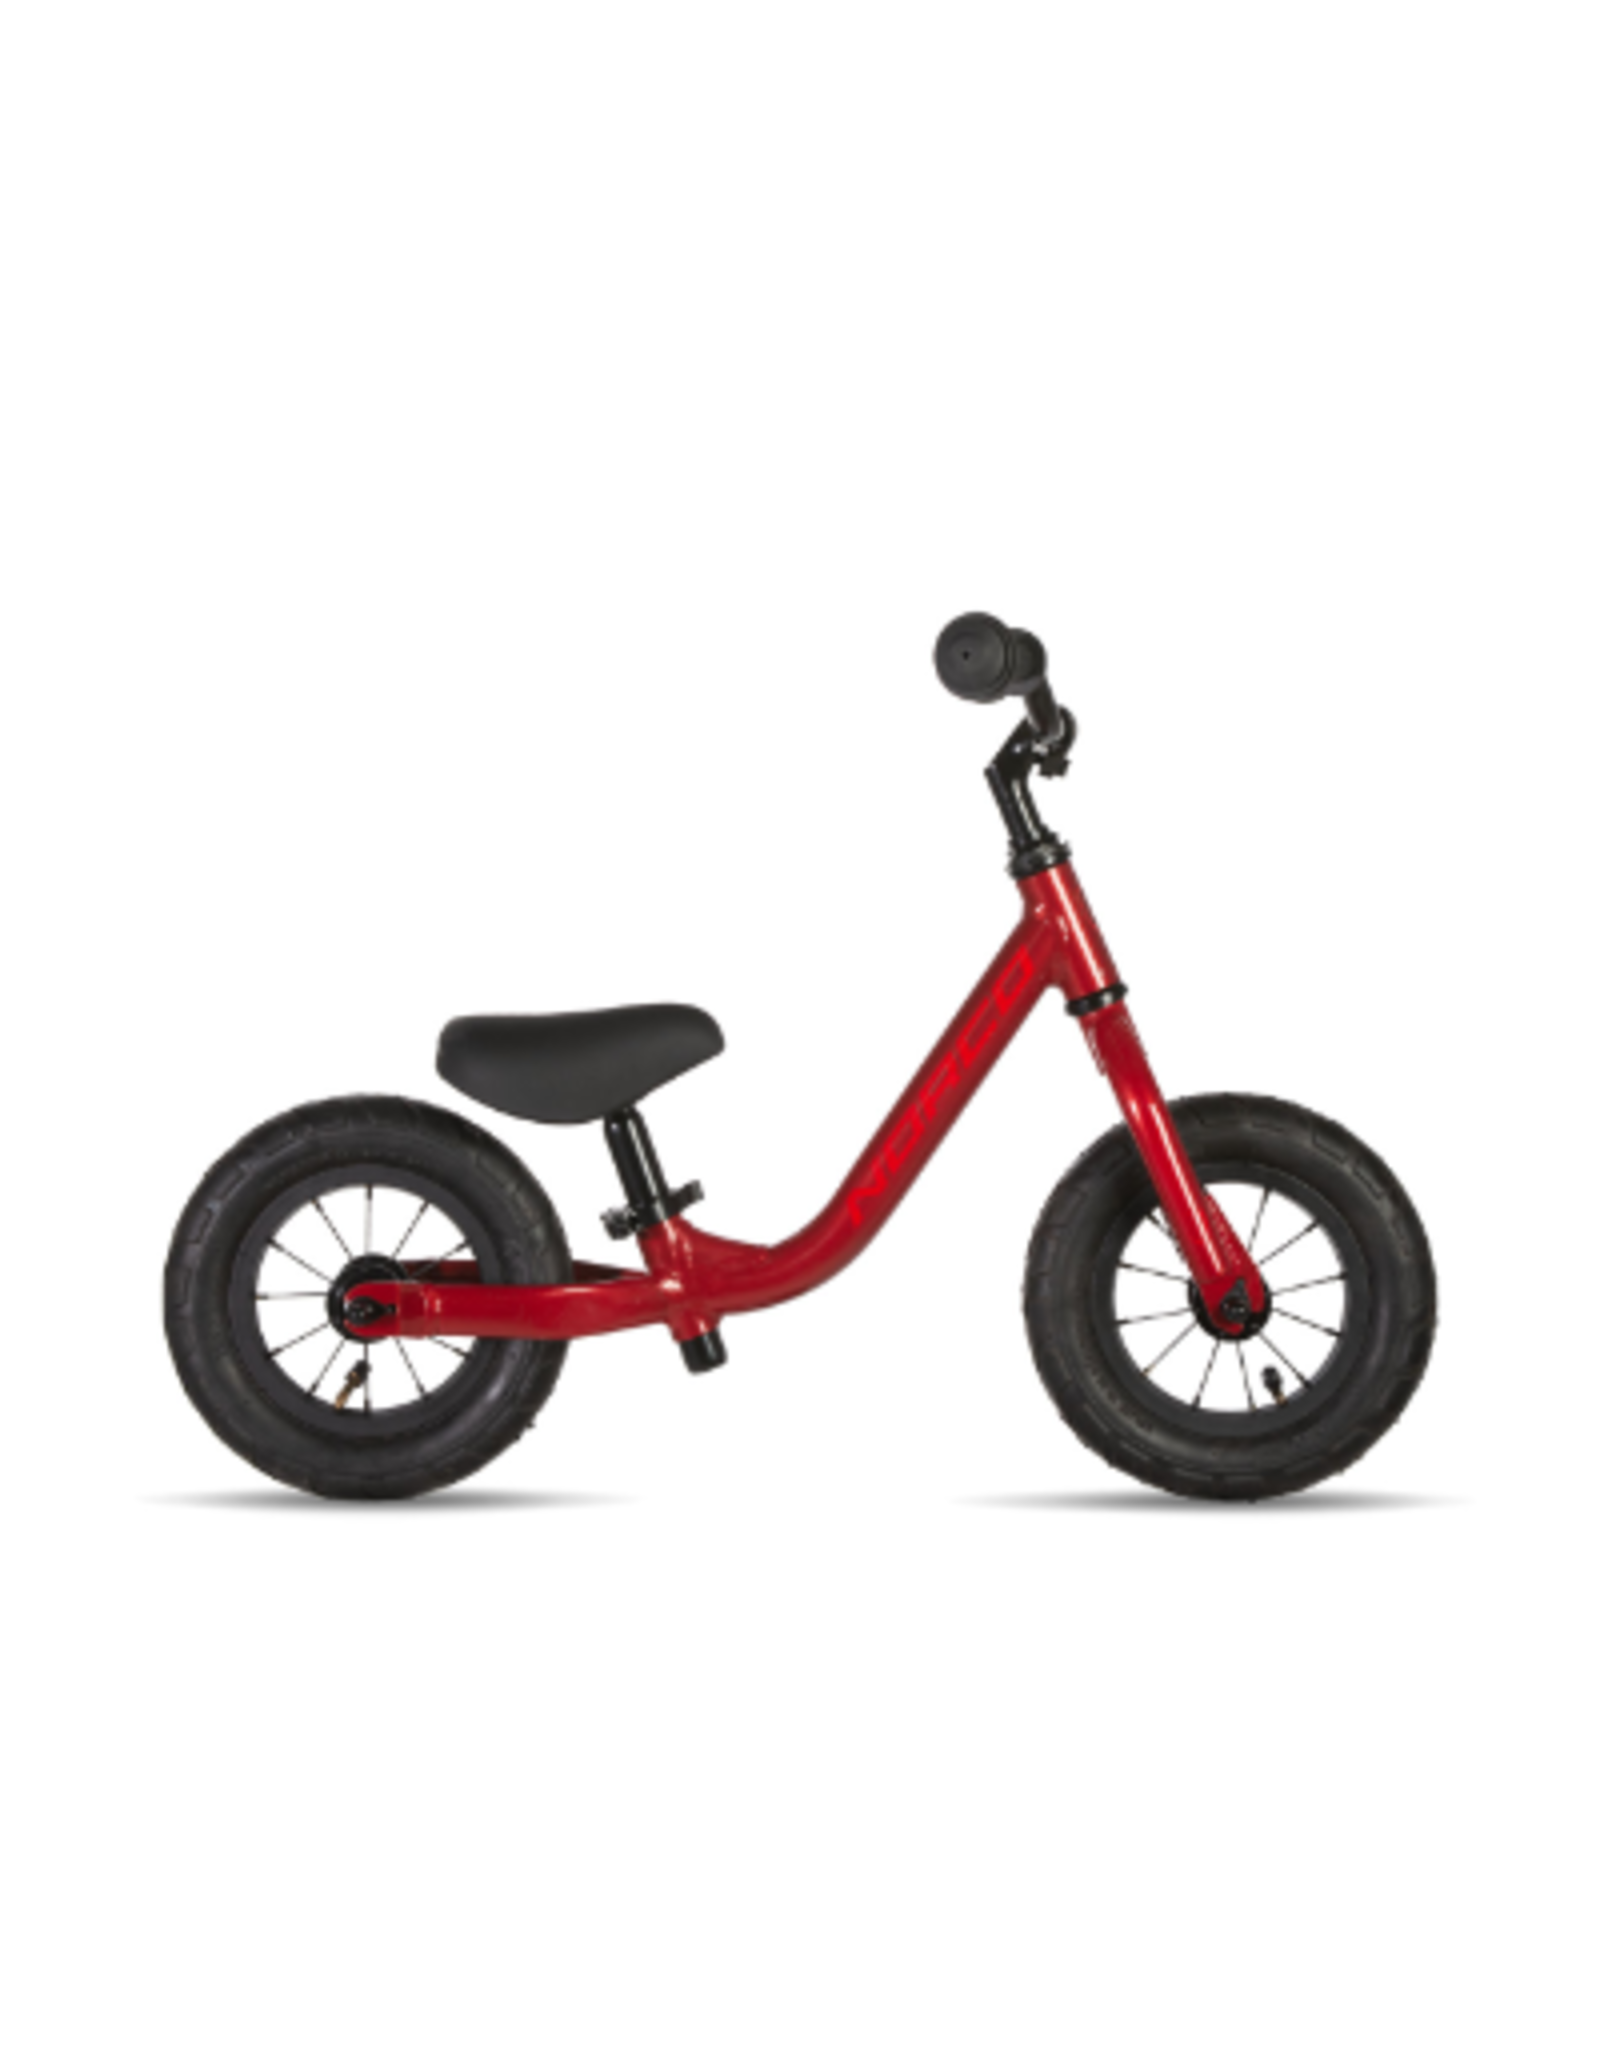 NORCO NORCO YOUTH 10" RUNNER BALANCE BIKE RED/RED